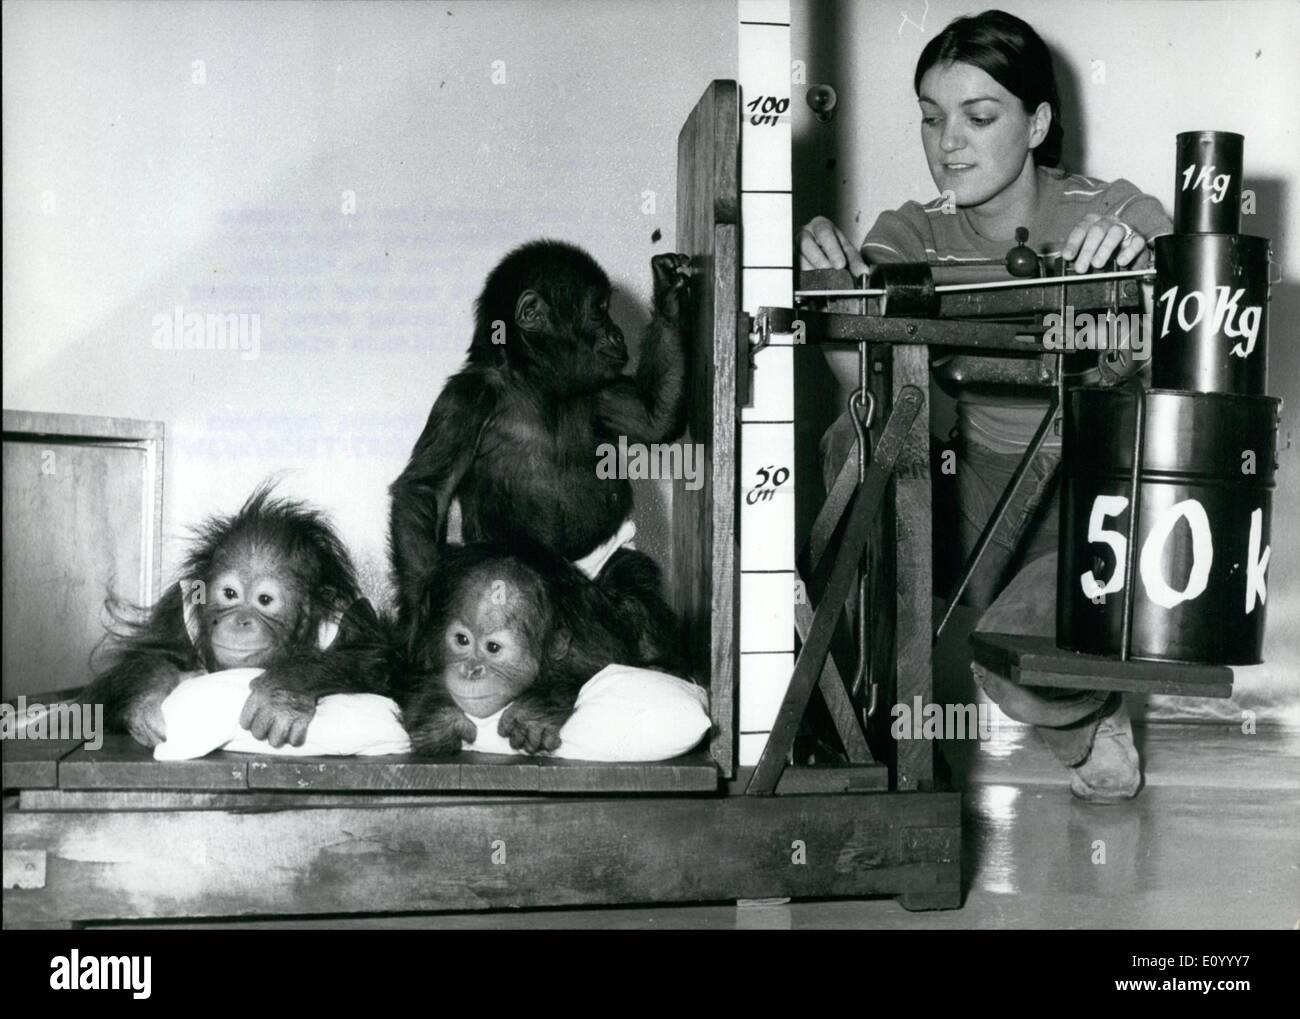 Dec. 12, 1971 - Frankfurt Zoo Takes Inventory: The total weight of this new generation - a couple of Orang-Outang babies and gorilla-girl '' Dorle'' - is over lo stones! Nurse Birgit from the ''Children's department'' of the Frankfurt zoo was delighted to see the tangible result of her loving care. The zoo recently admitted its three millionth visitor this season! Stock Photo